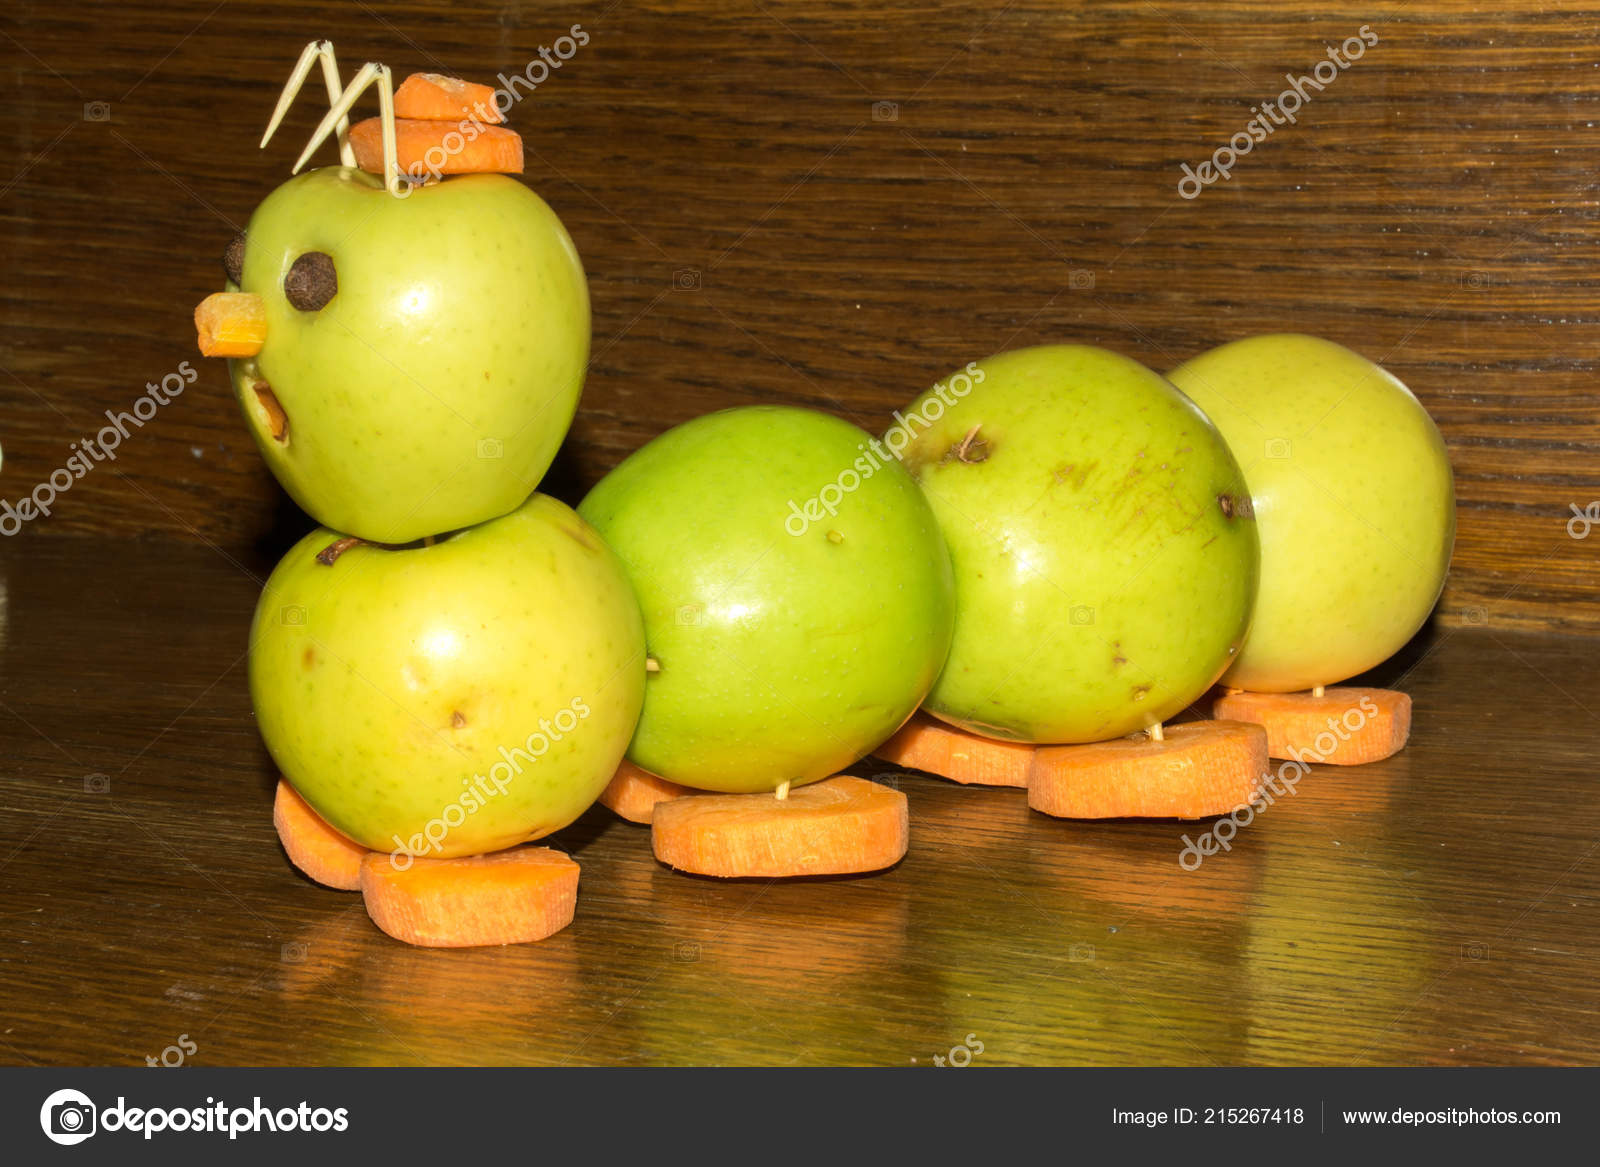 Animal Made From Fruit And Veg - 1600x1167 Wallpaper 